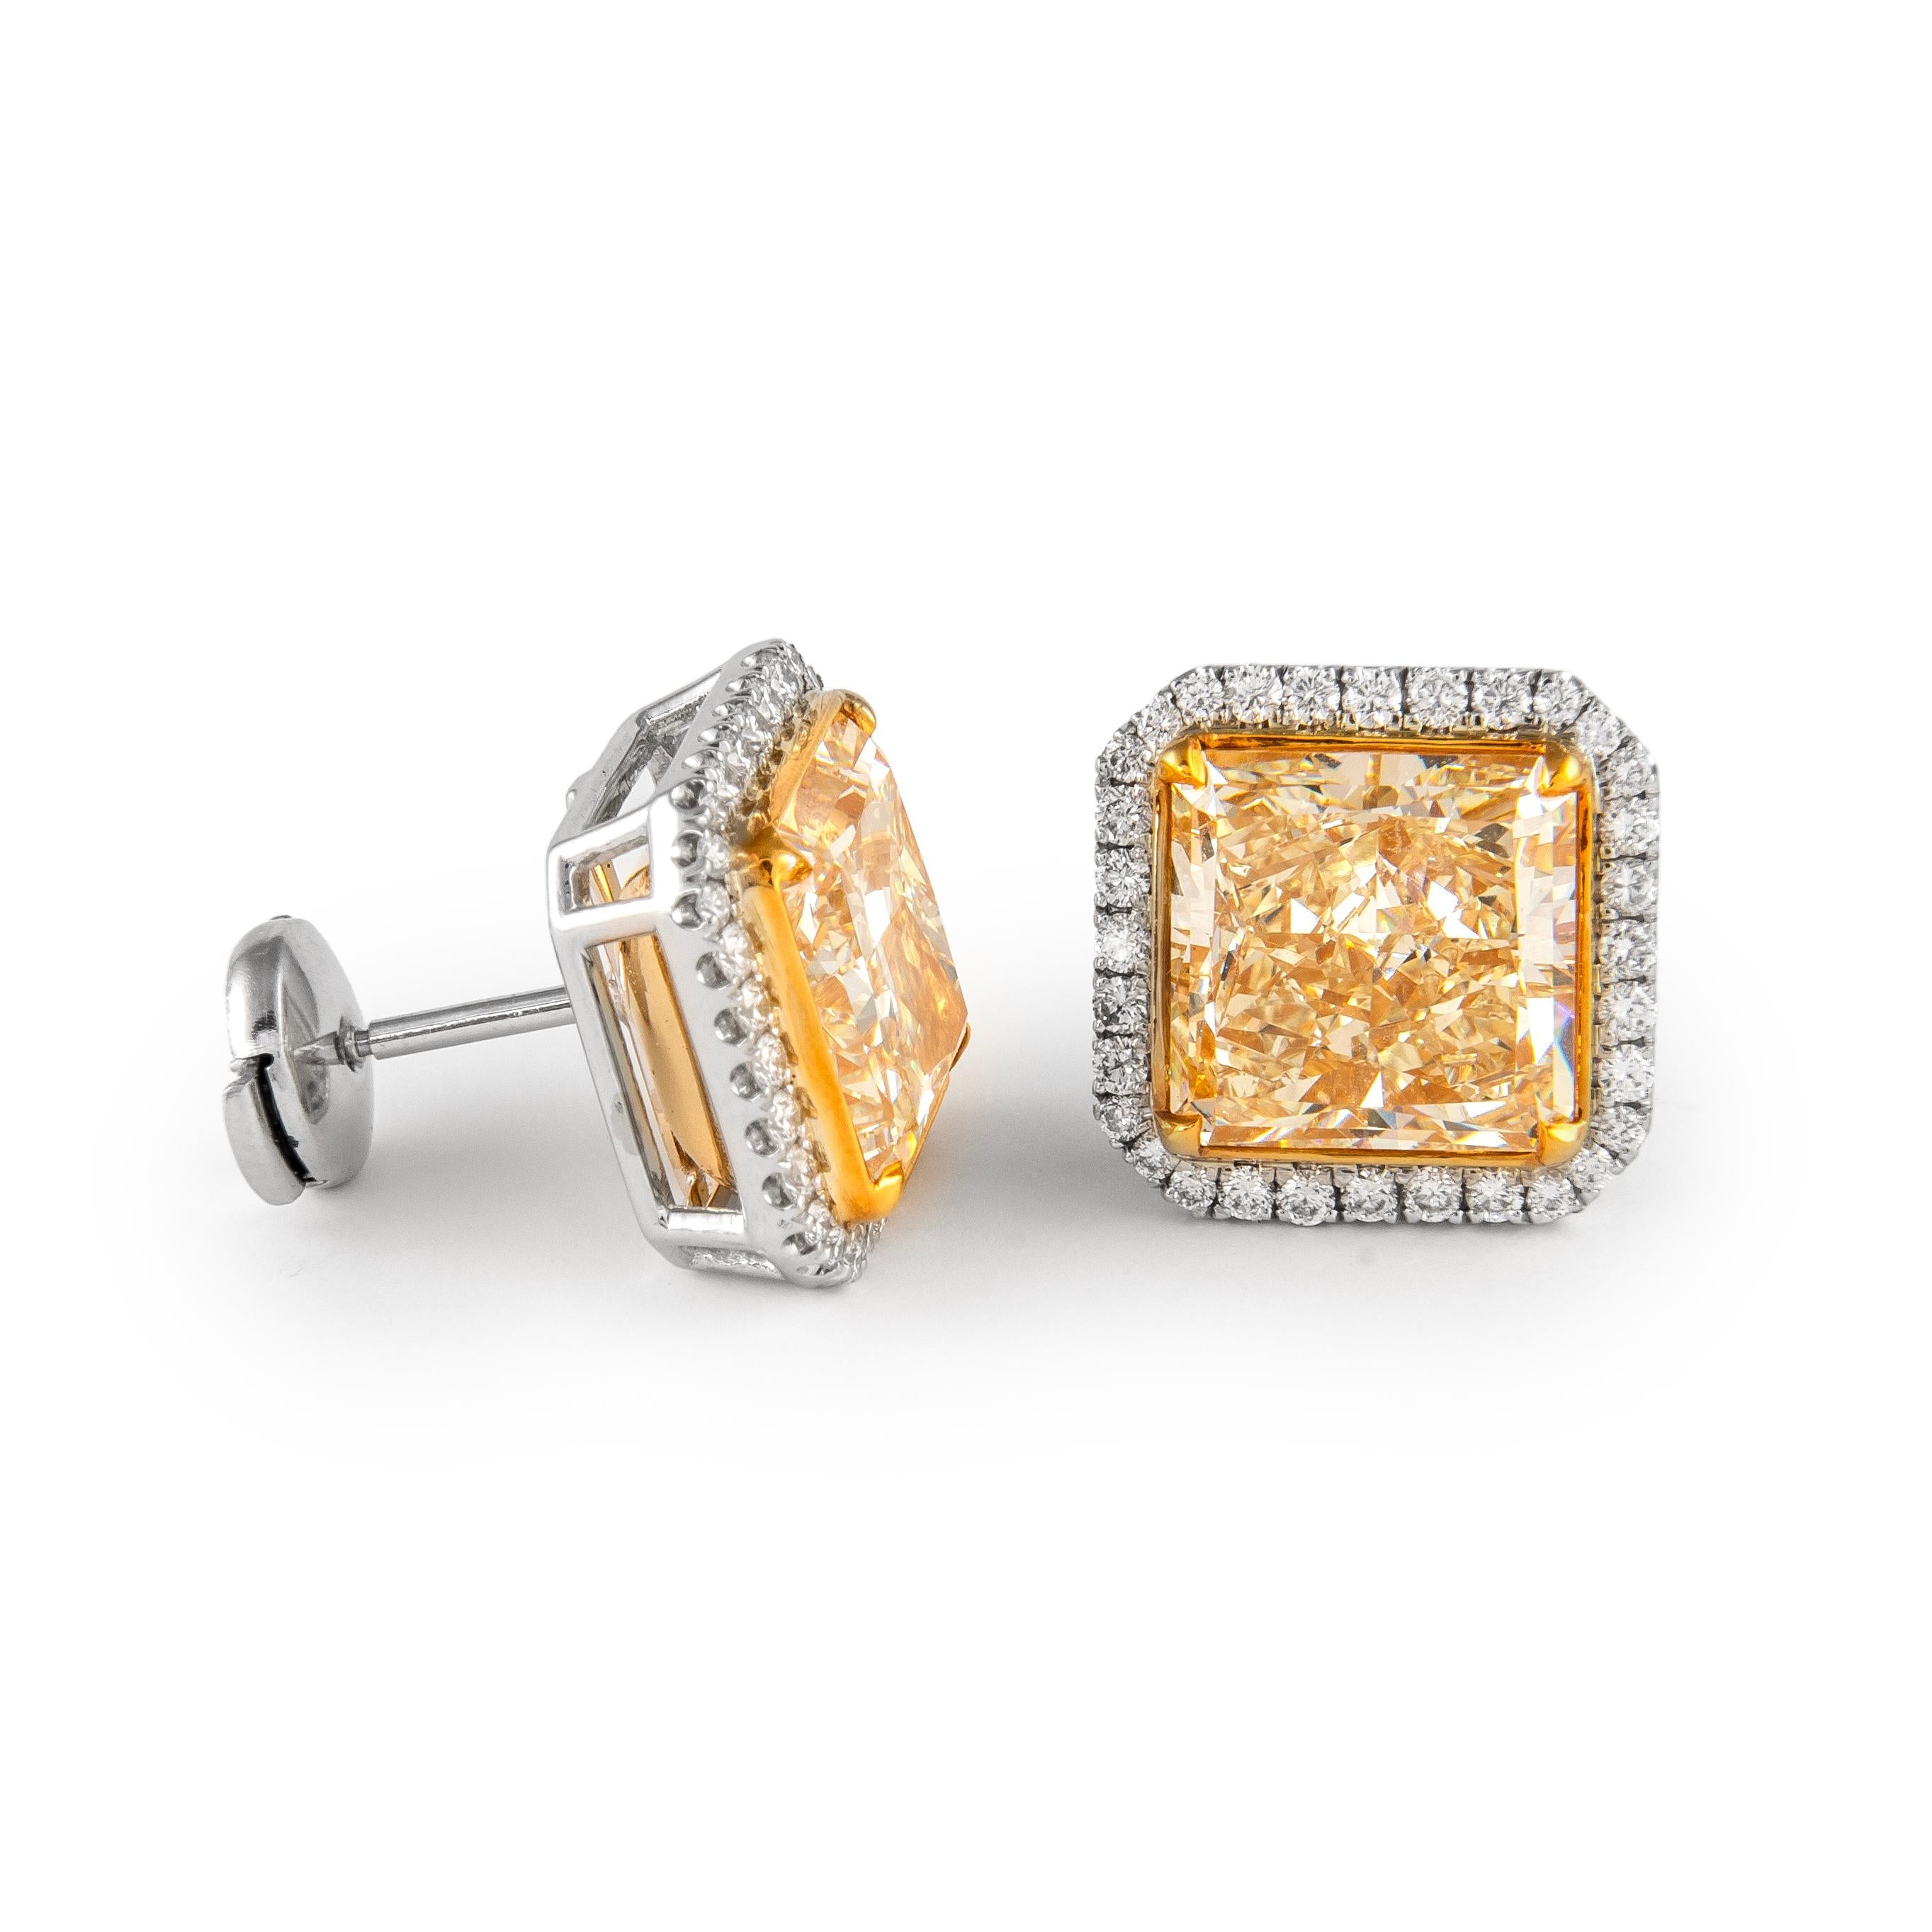 Contemporary Alexander Beverly Hills 12.84ct Fancy Yellow Diamond Stud Earrings with Halo 18k For Sale